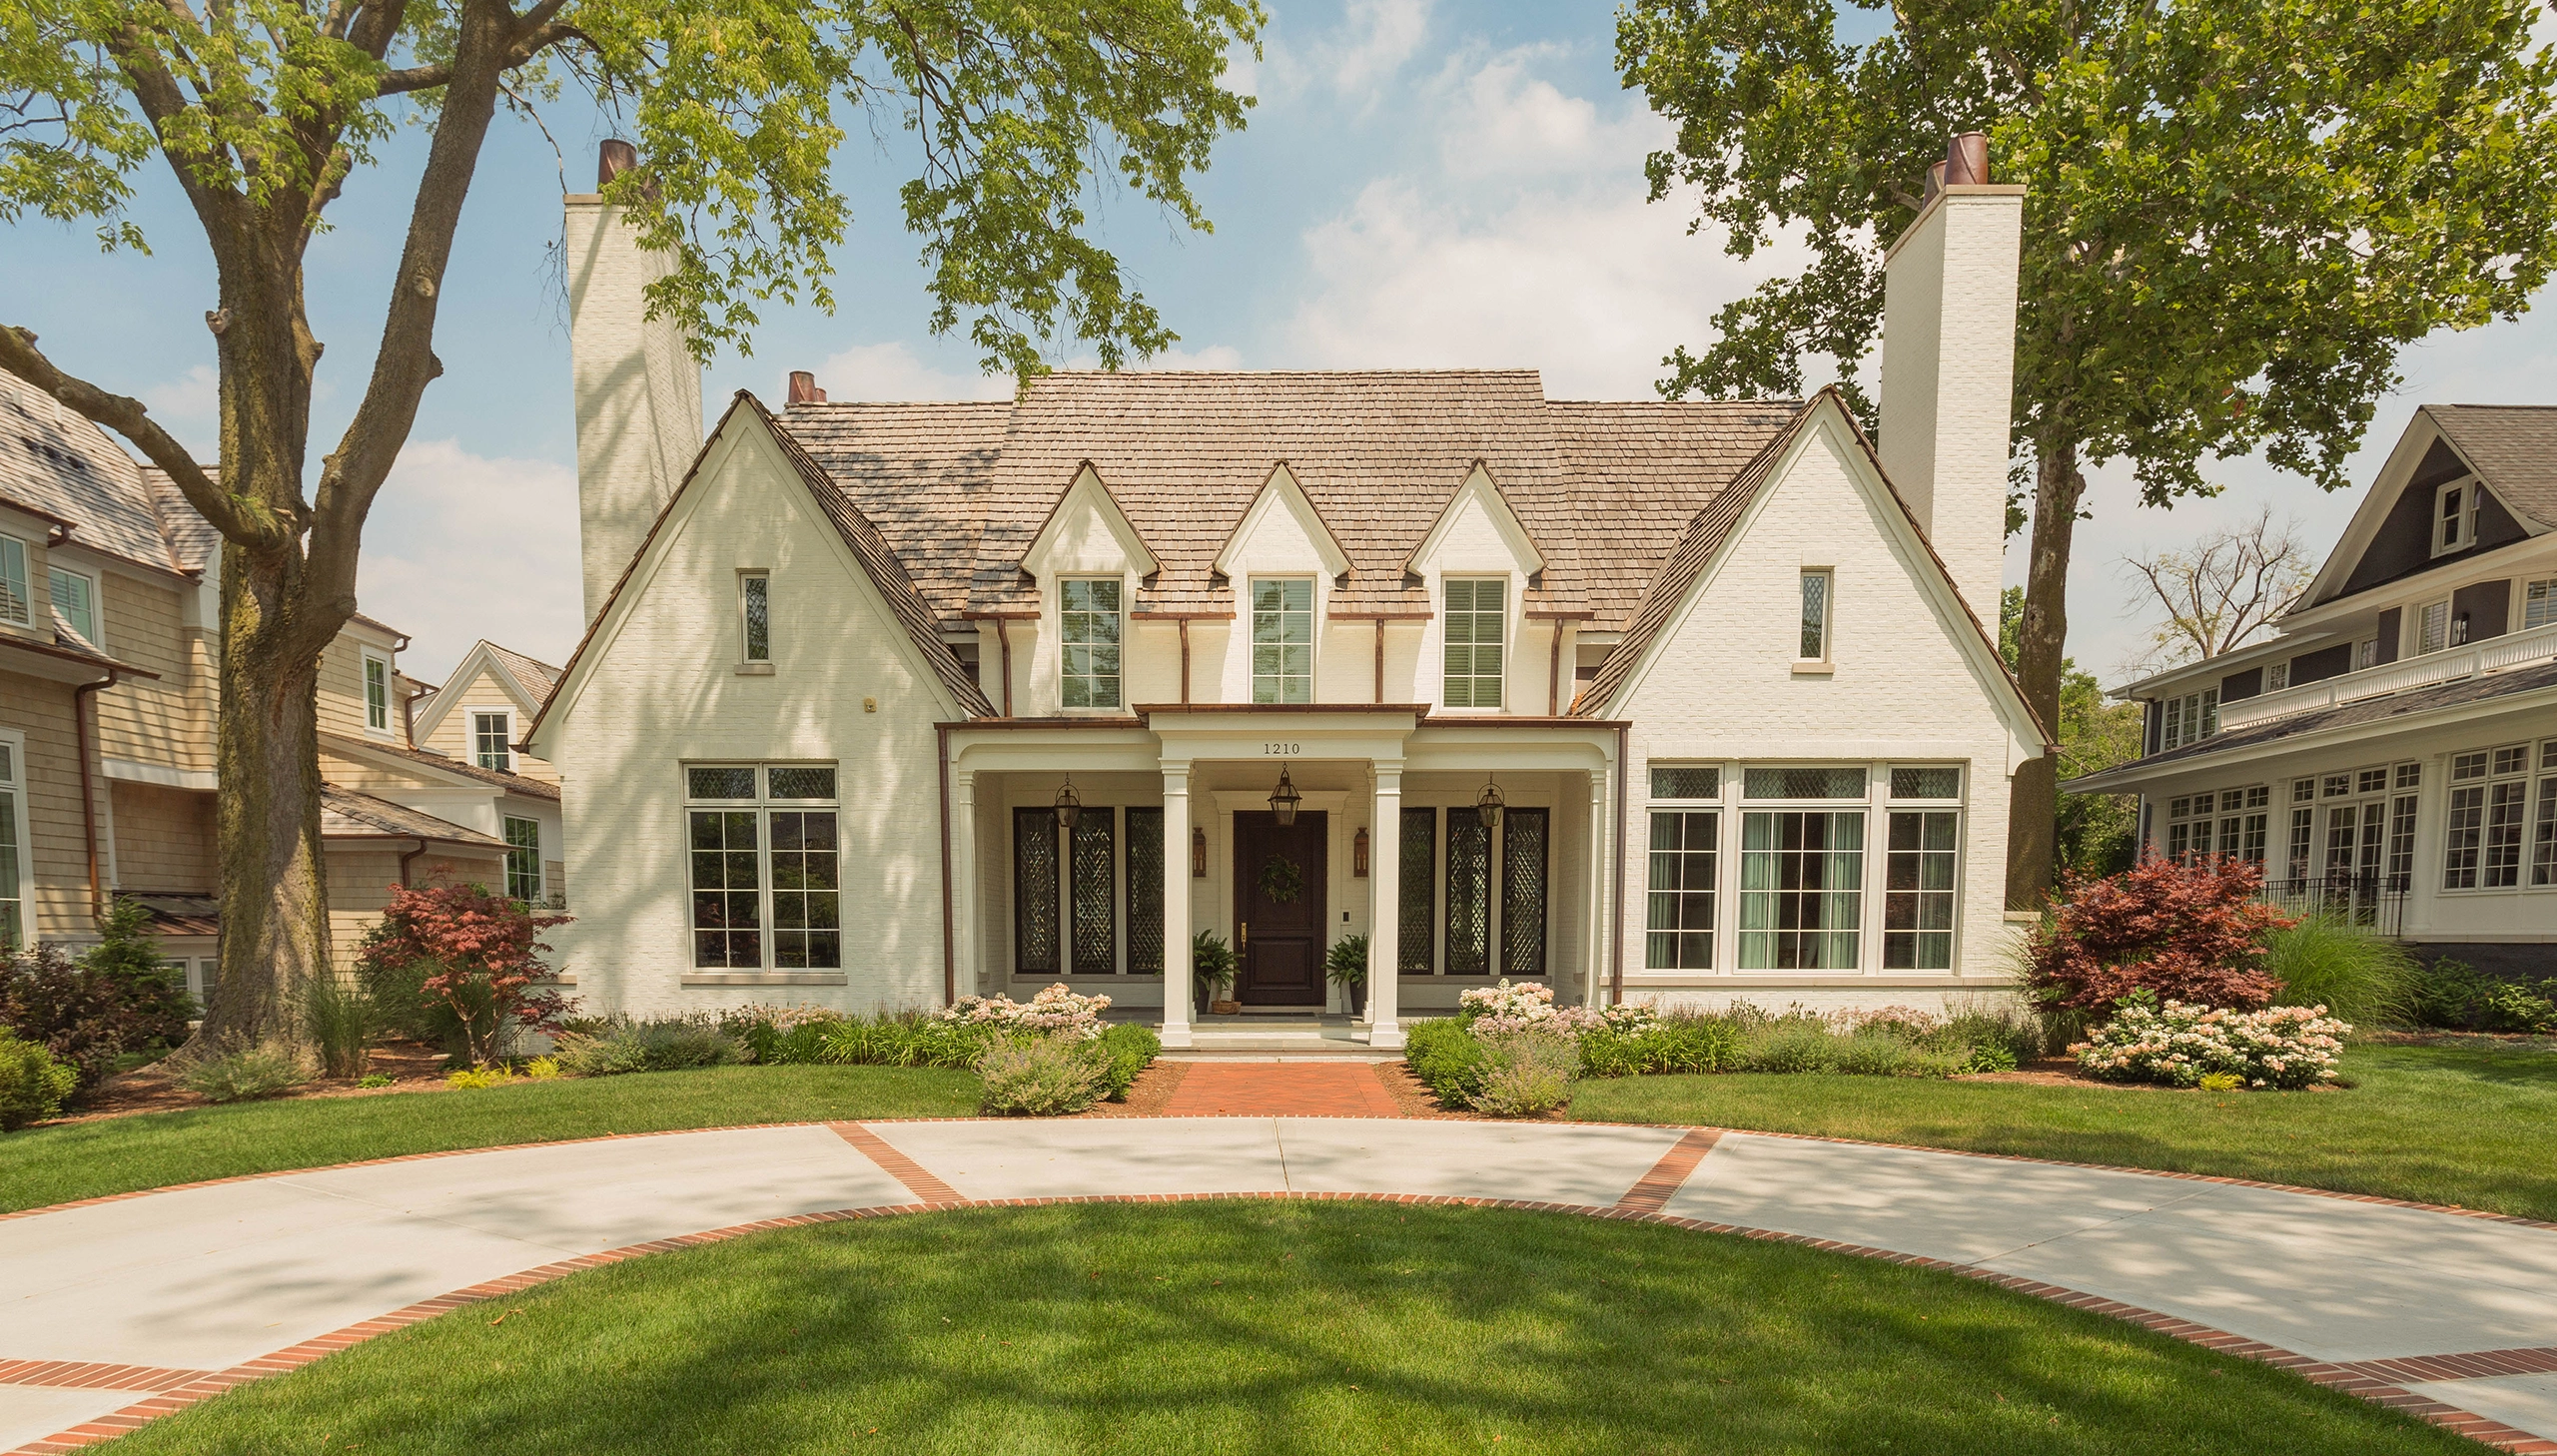 Traditional Modern Charm - Riordan Custom Home Project in Chicago